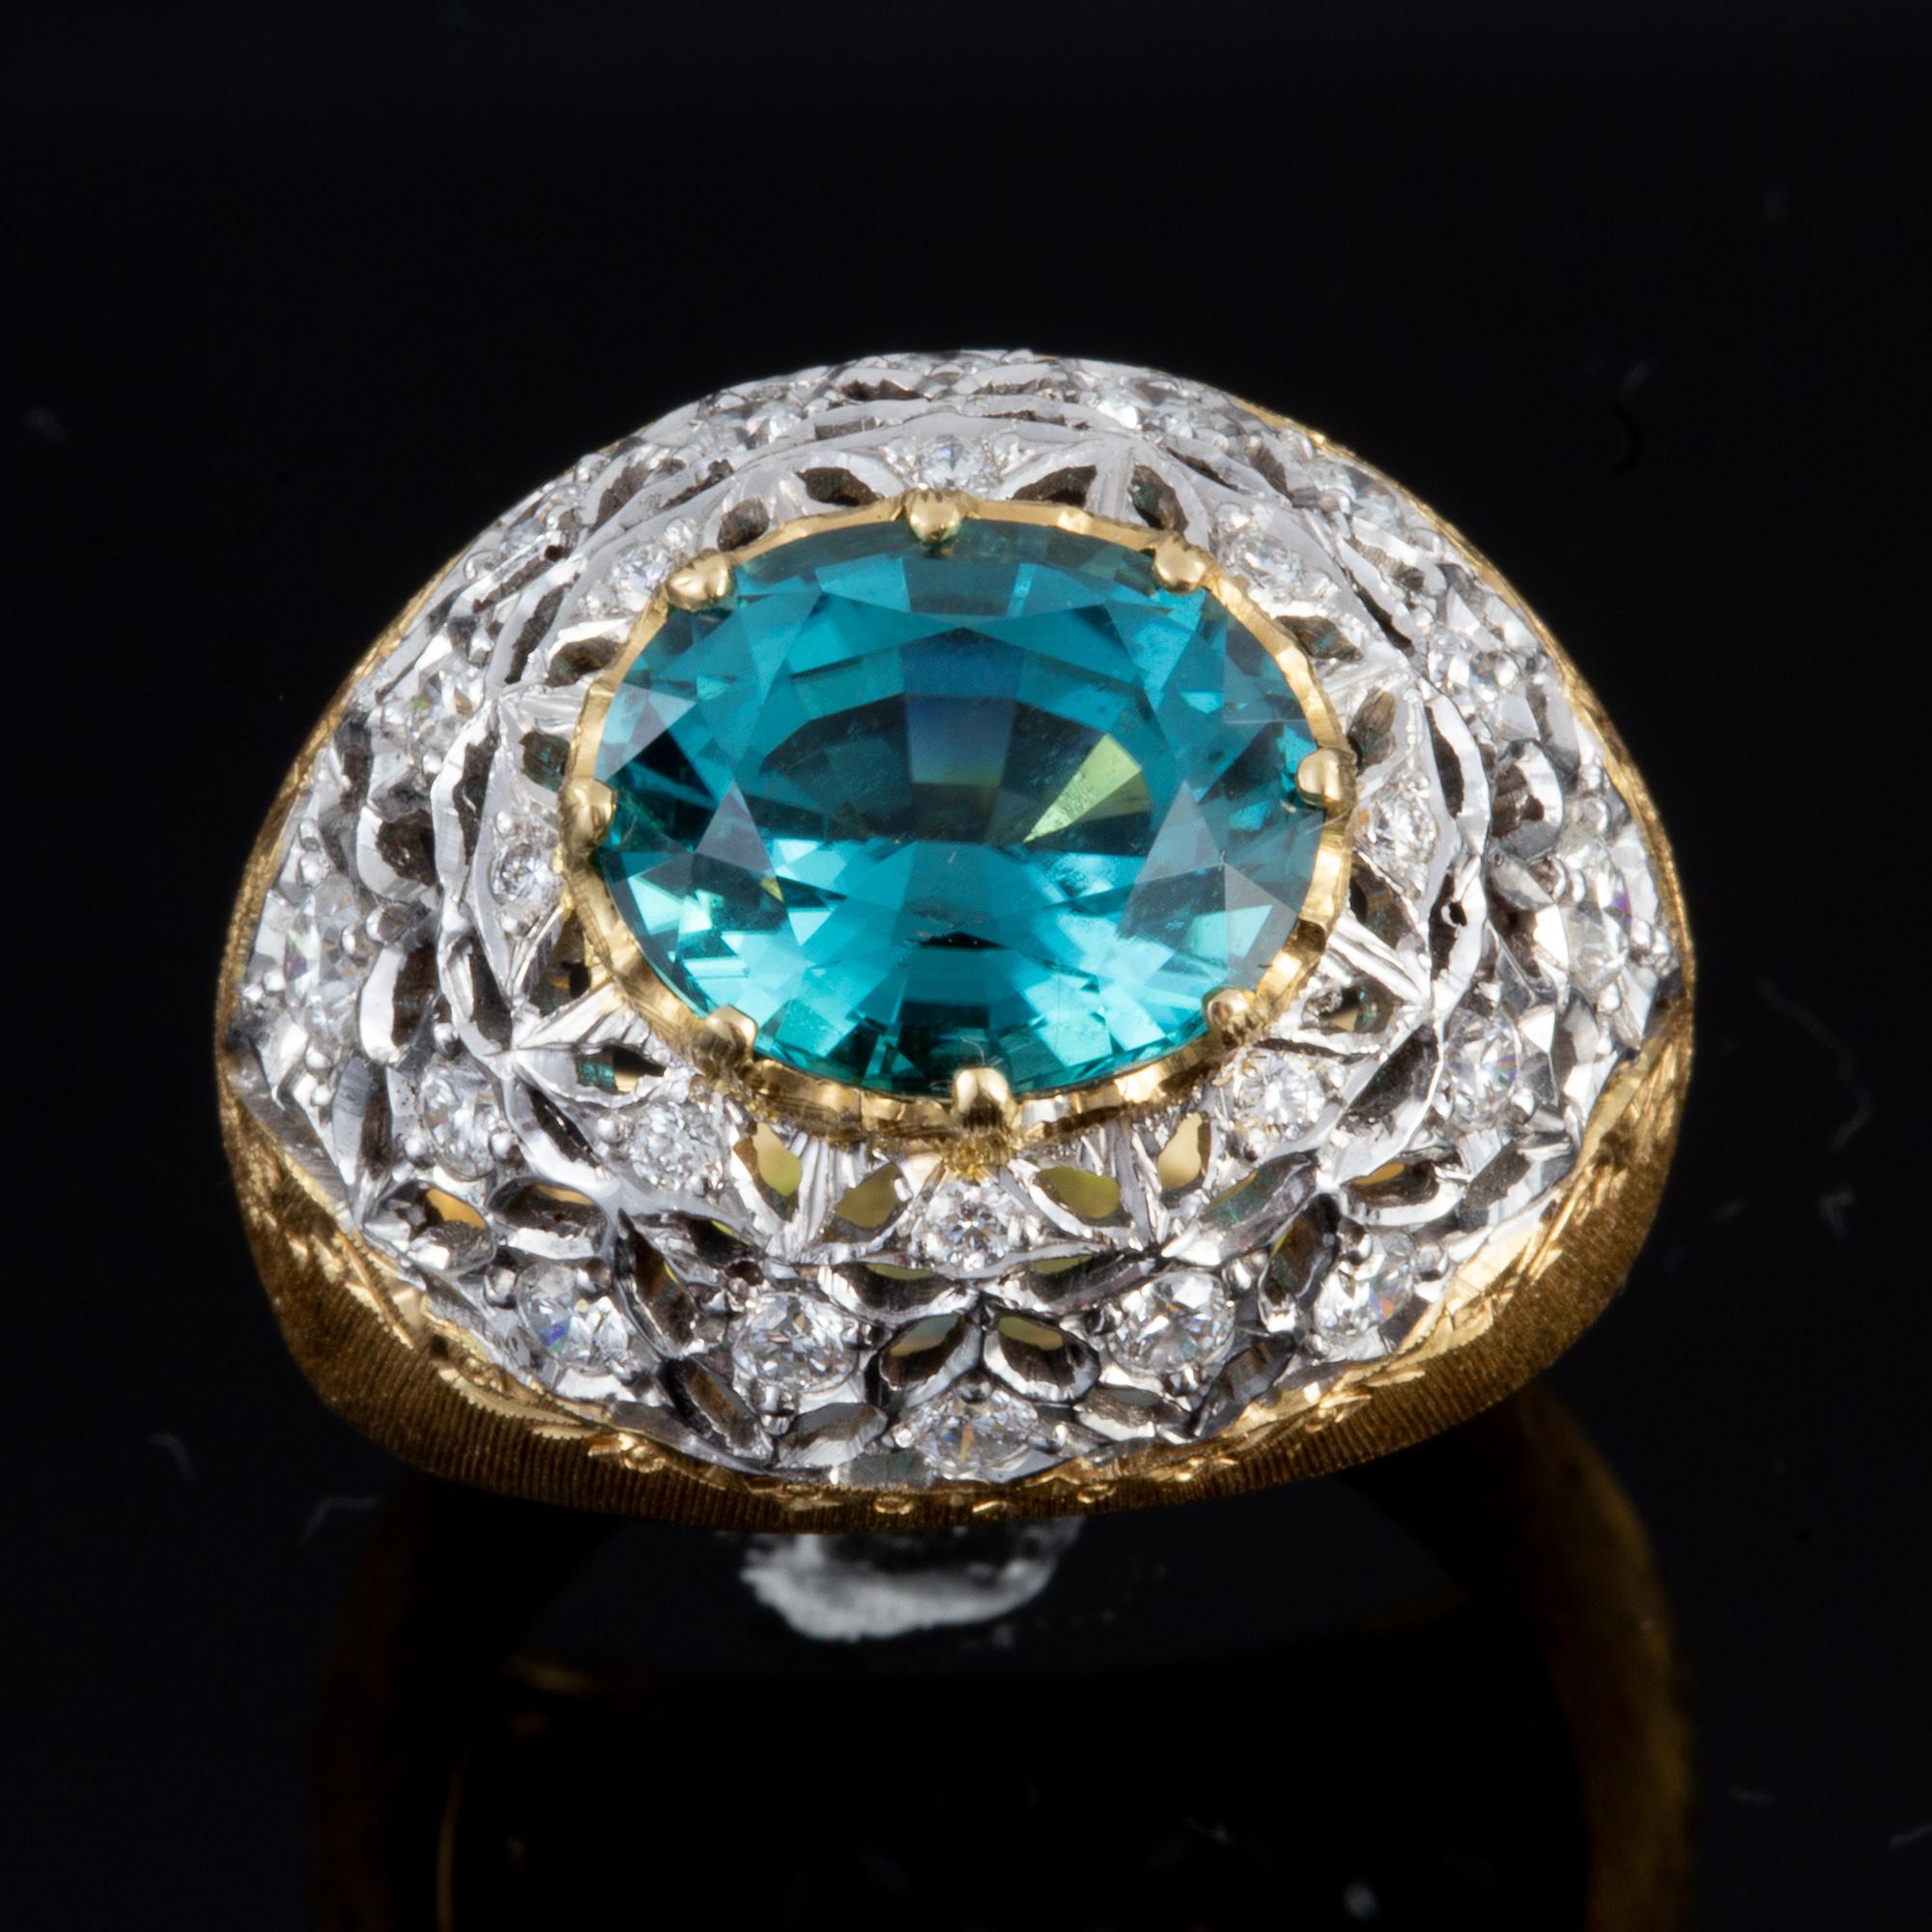 Handcrafted in Italy in an old world Florentine style, this exquisite blue green Tourmaline & Diamond ring is set in two tone 18 kt Gold and makes for a truly beautiful statement piece.  Handcrafted by a small family run studio in Florence, Italy